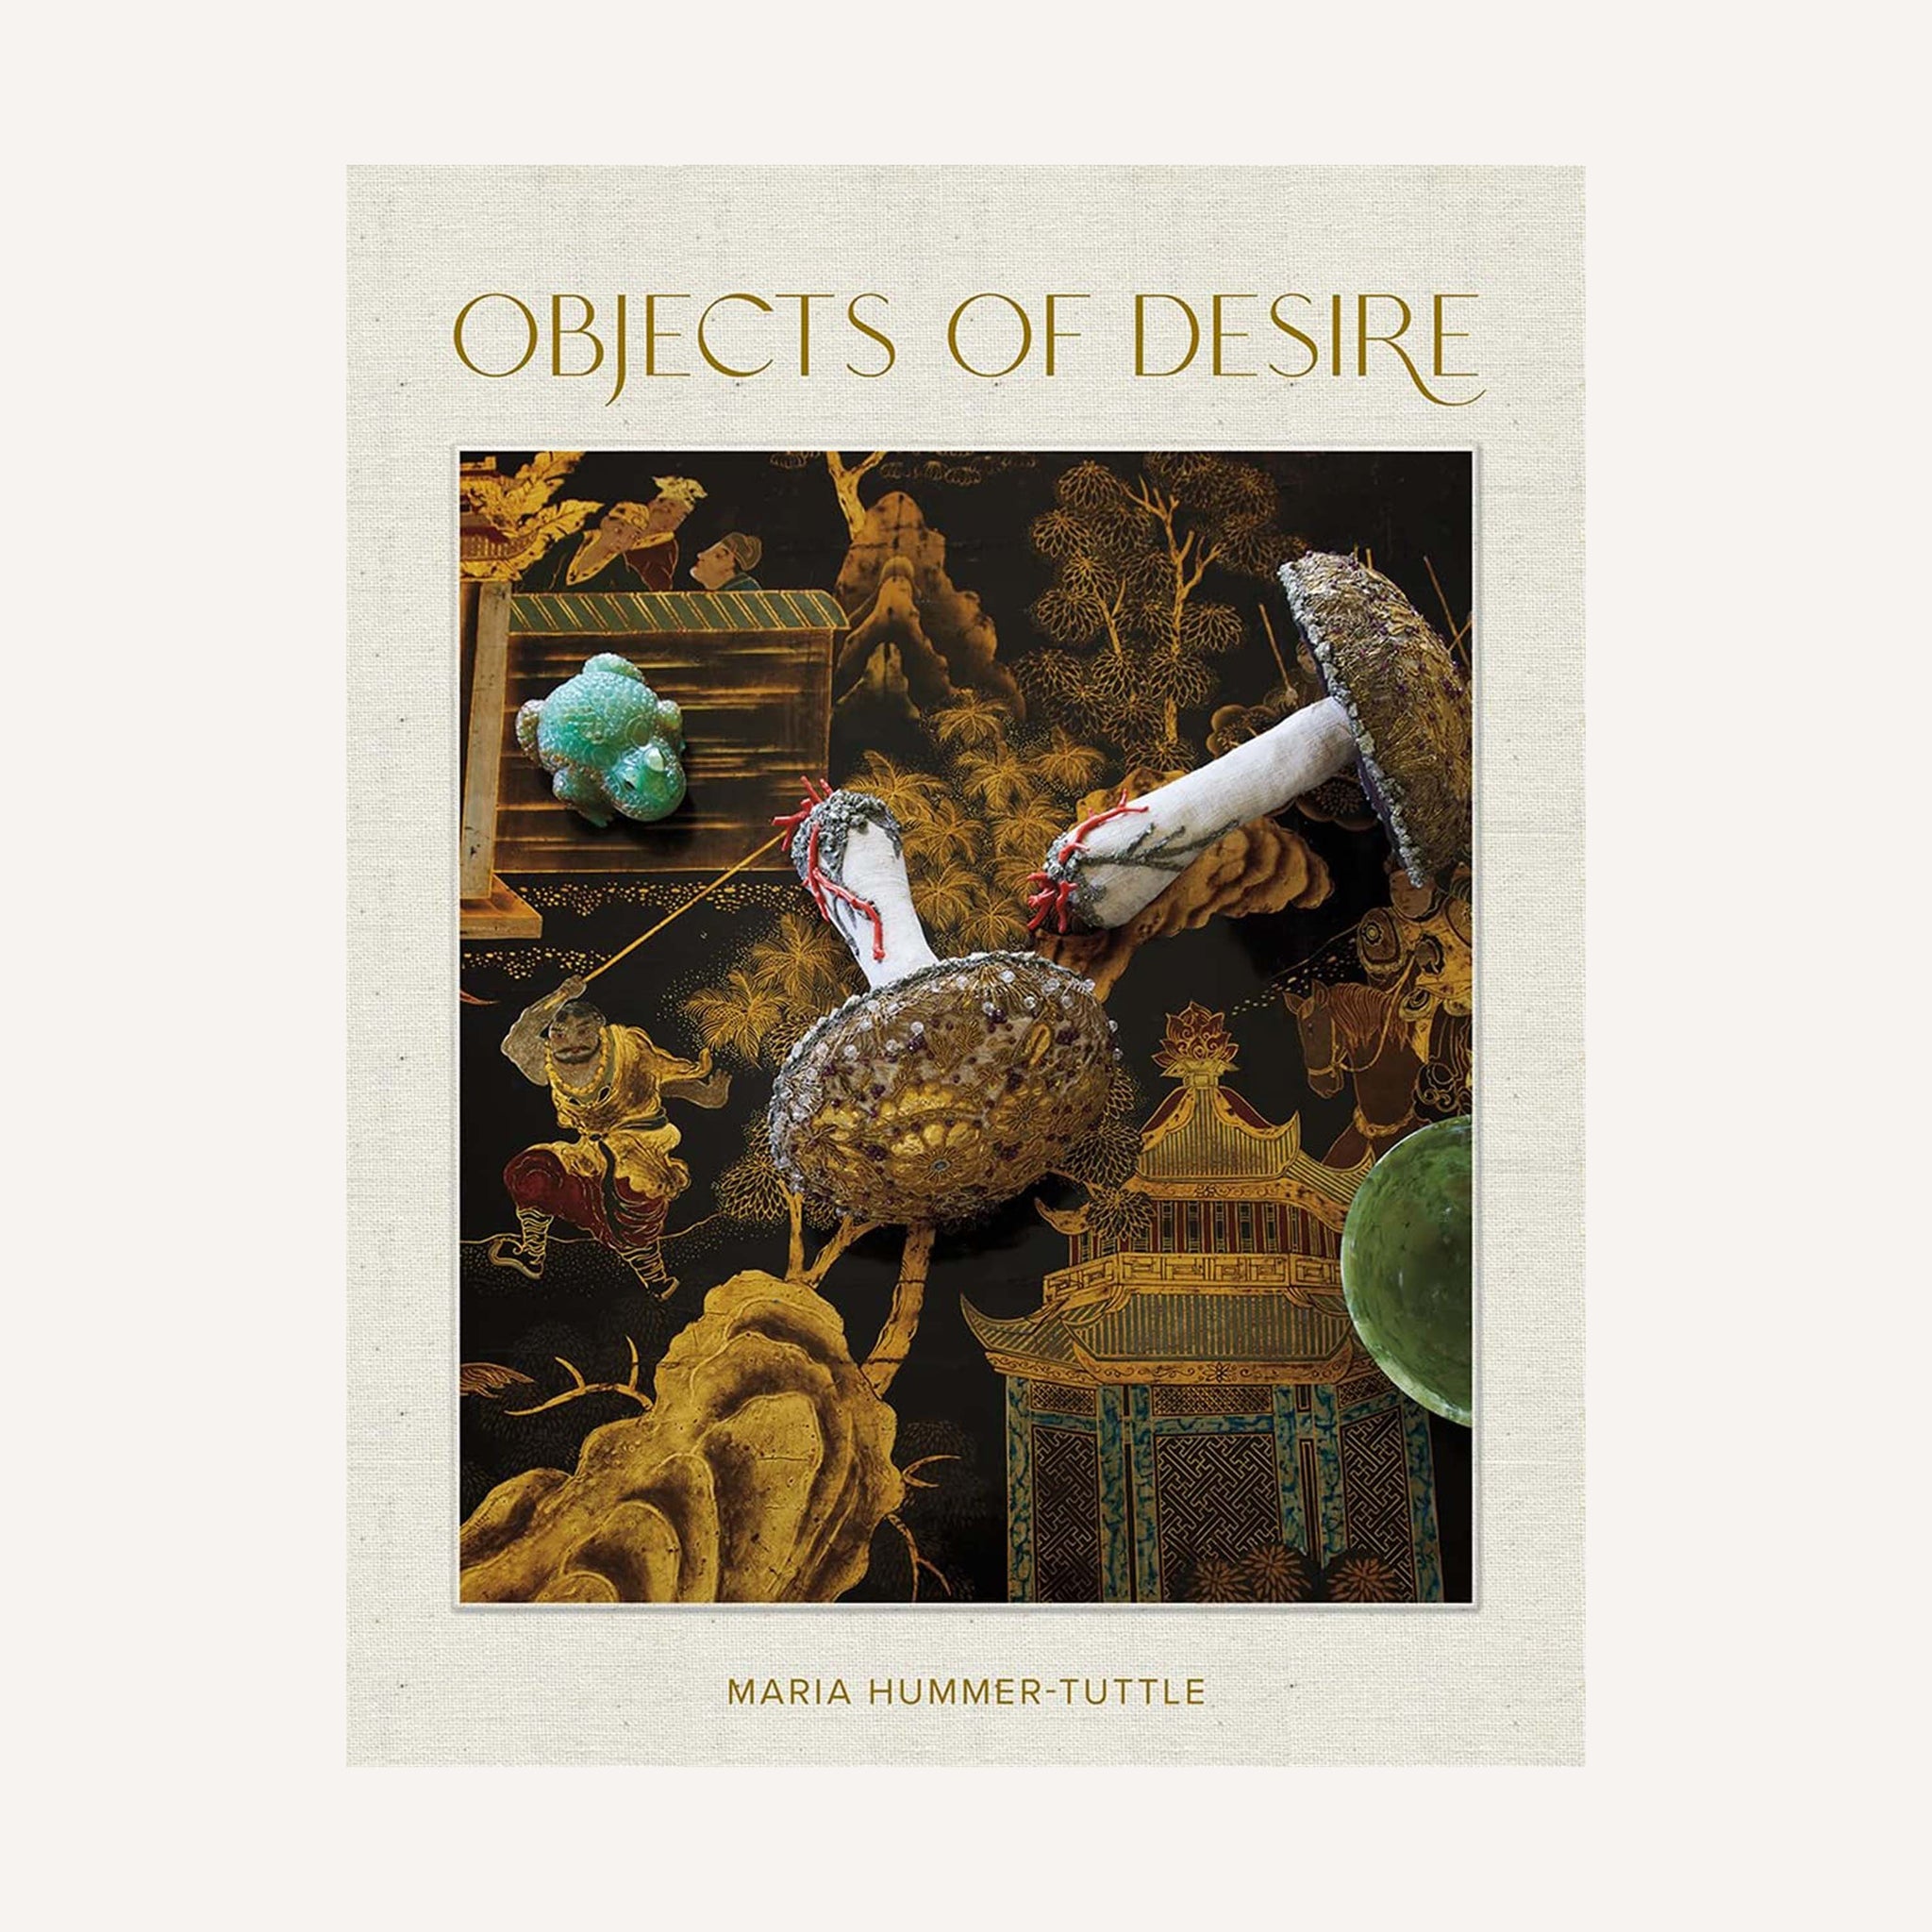 OBJECTS OF DESIRE, BY MARIA HUMMER-TUTTLE